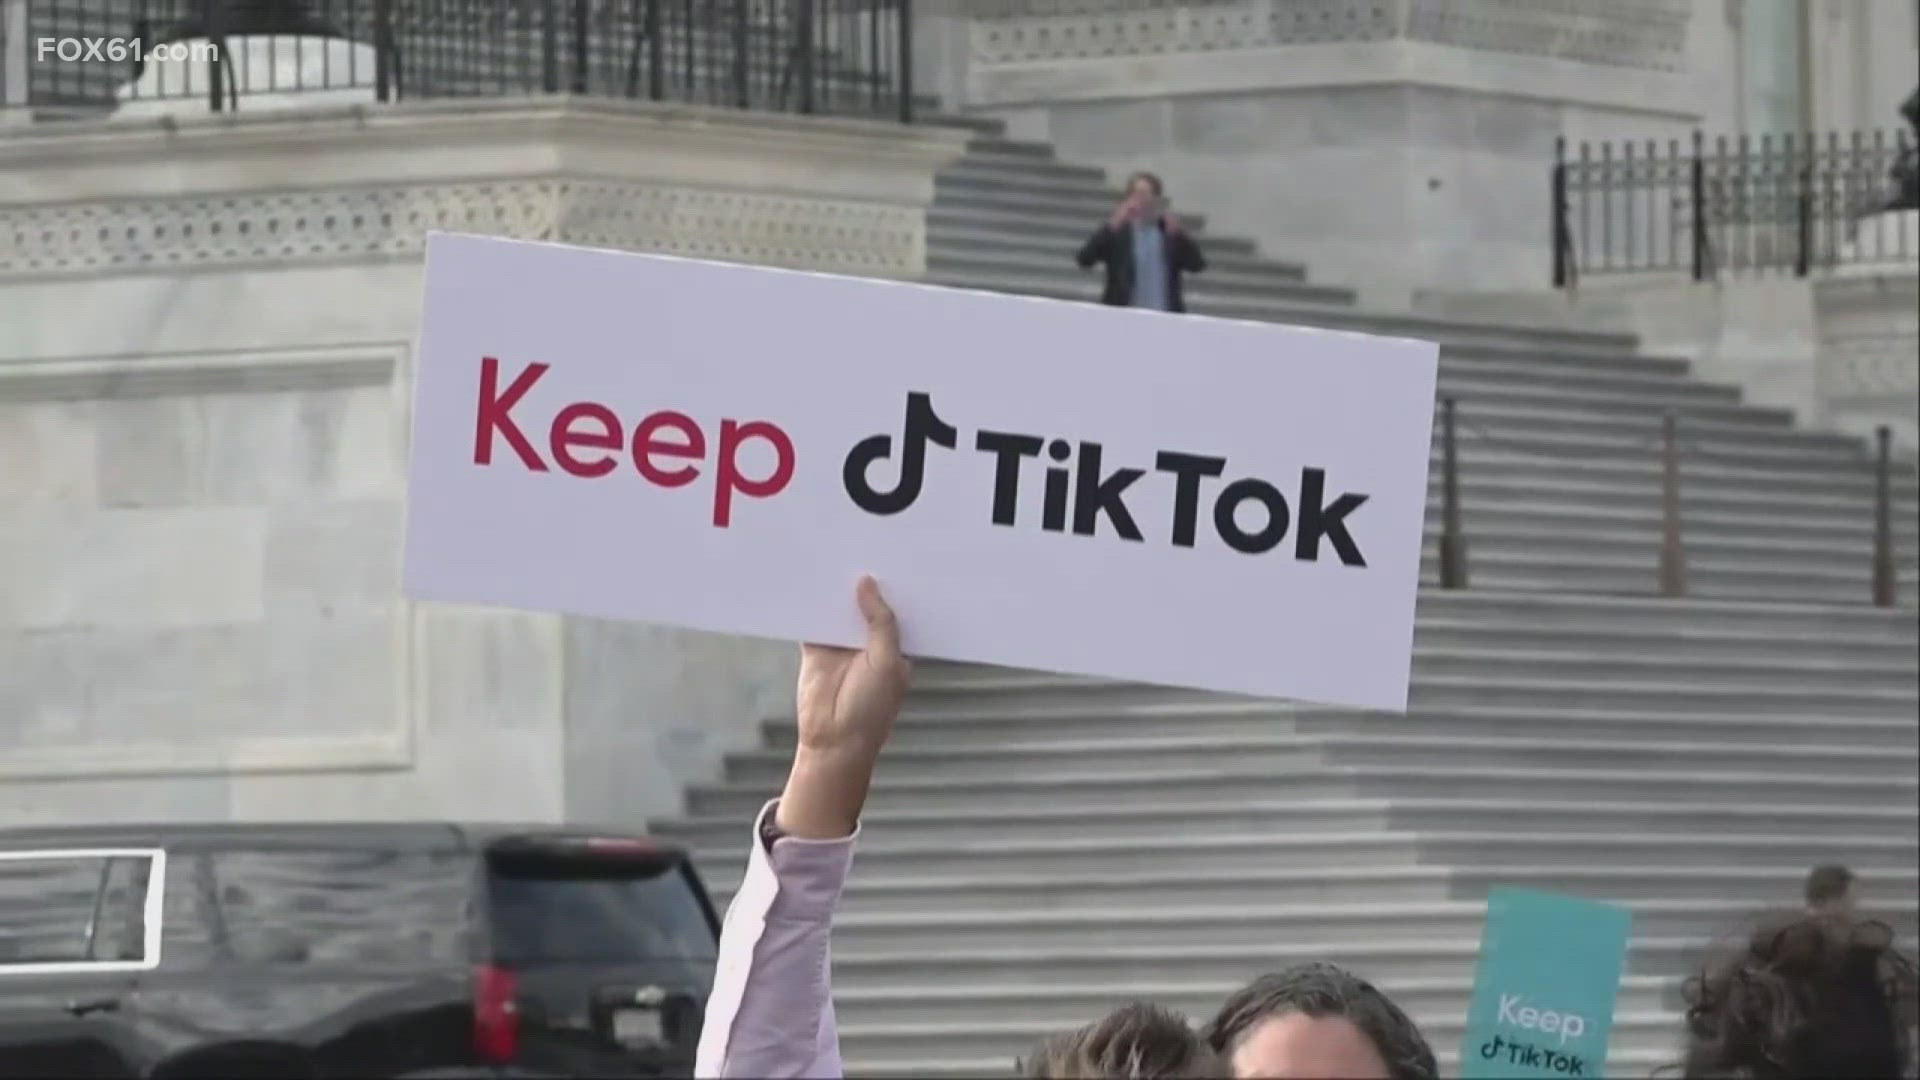 TikTok filed a lawsuit against the U.S. this week in hopes of blocking a law that could ban the social media app in the U.S., calling the ban unconstitutional.